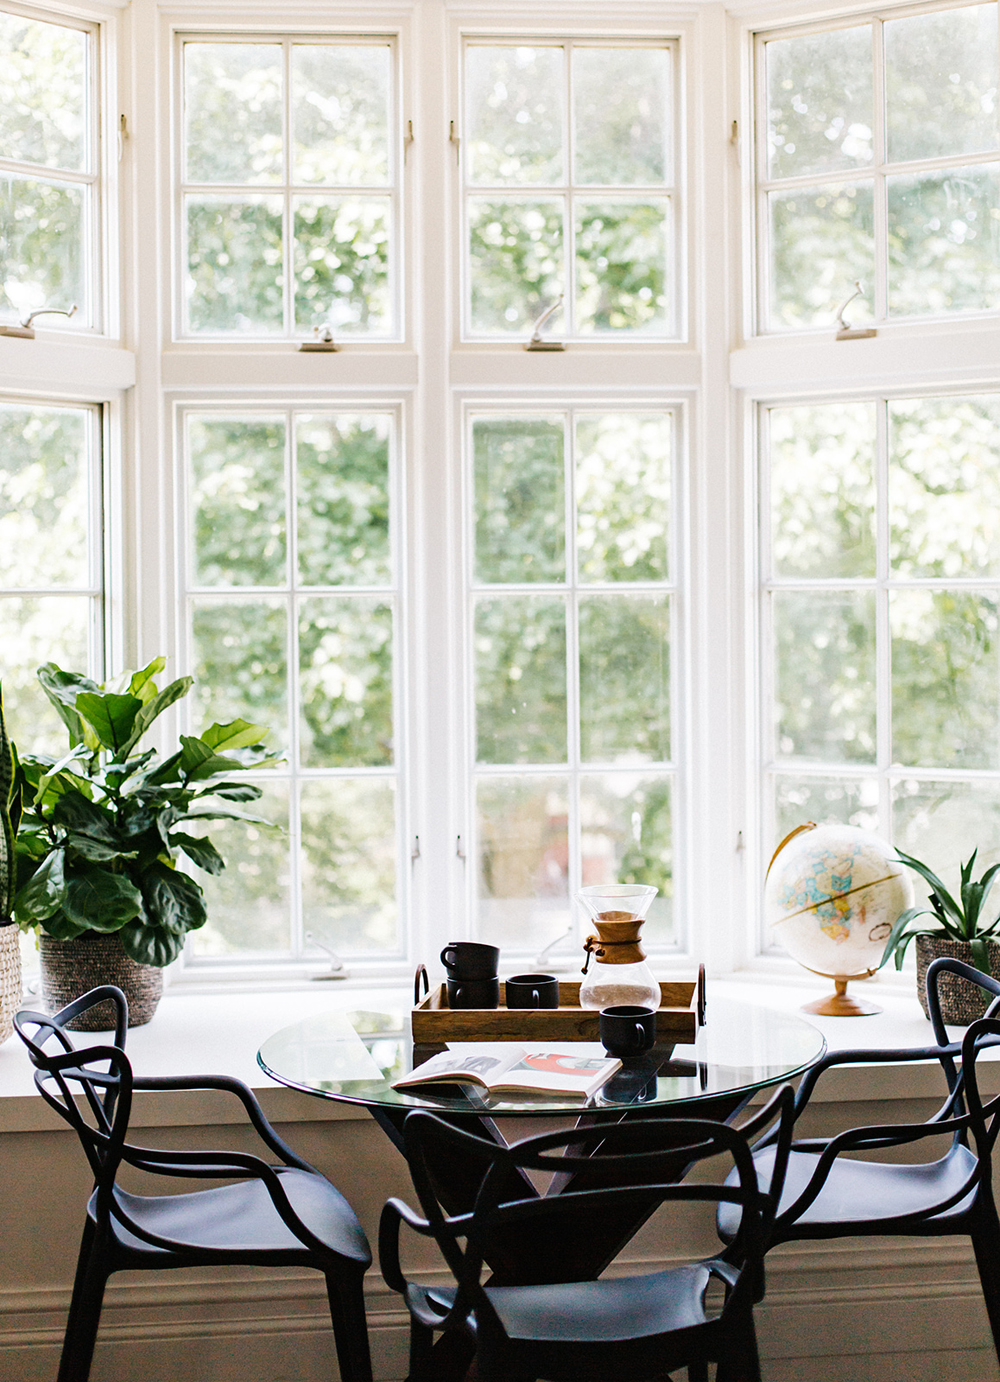 Large glass windows in a dining space or breakfast nook